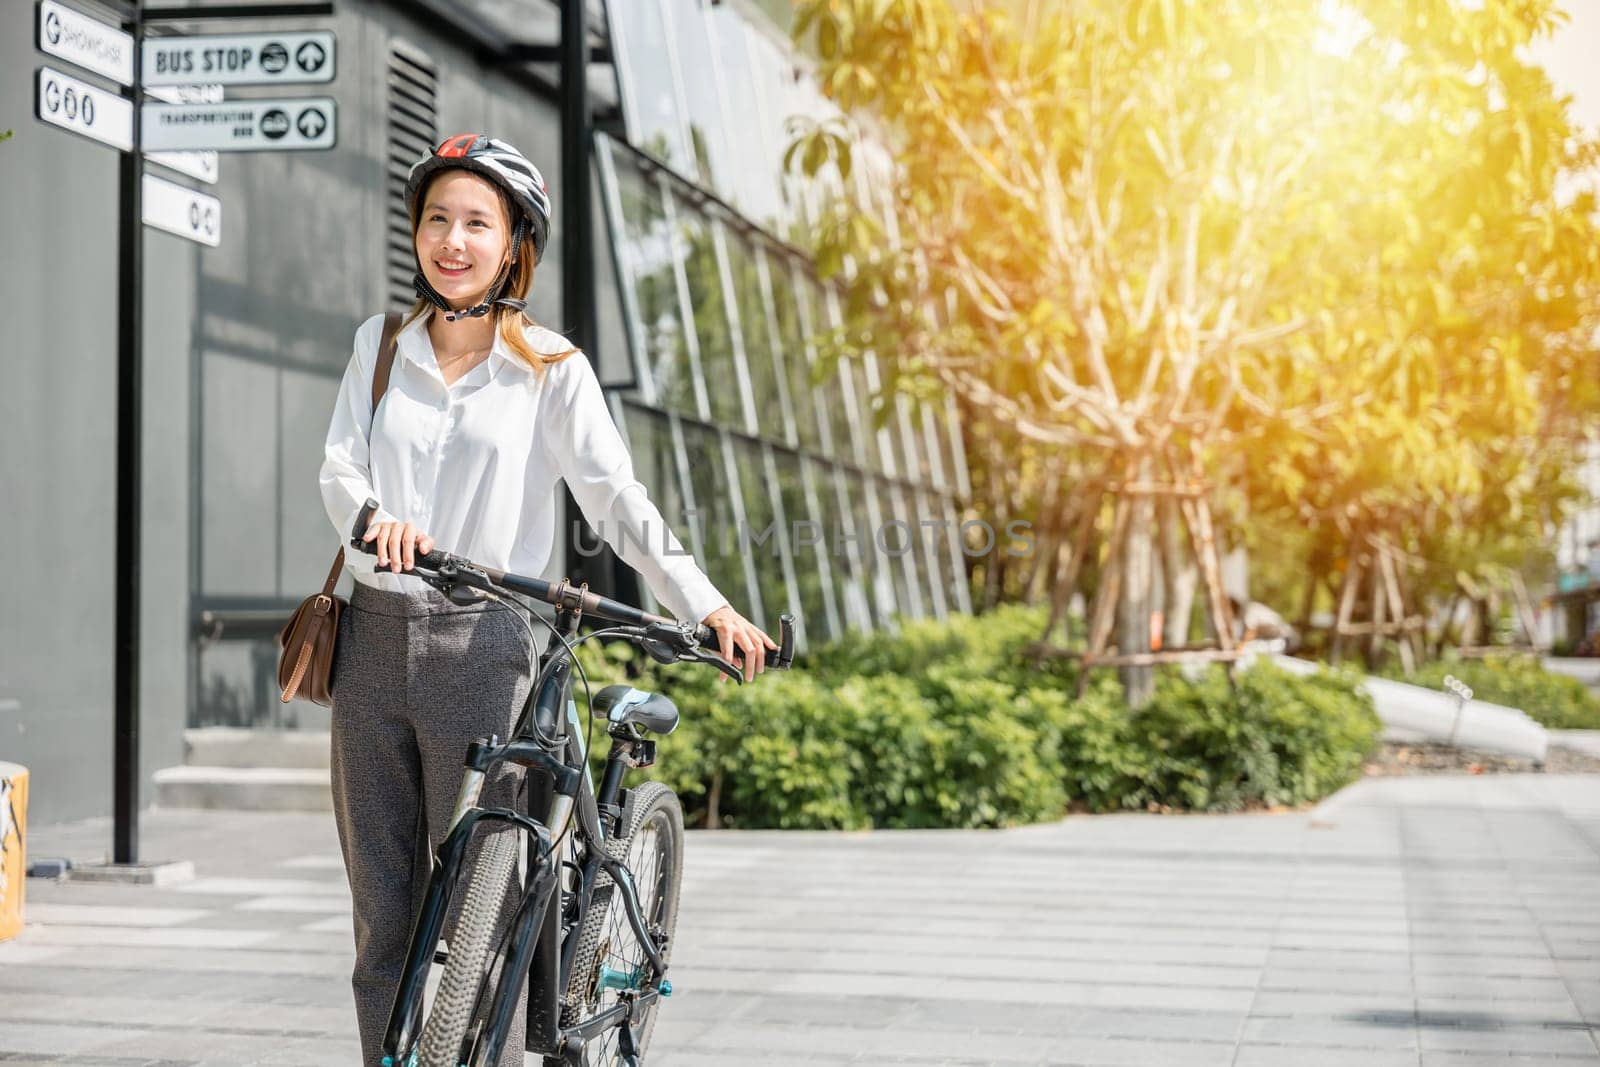 A cheerful Asian businesswoman helmeted and in suit stands with her bicycle symbolizing the modern concept of a joyful business commuter. This image showcases the harmony between work and outdoor fun. by Sorapop